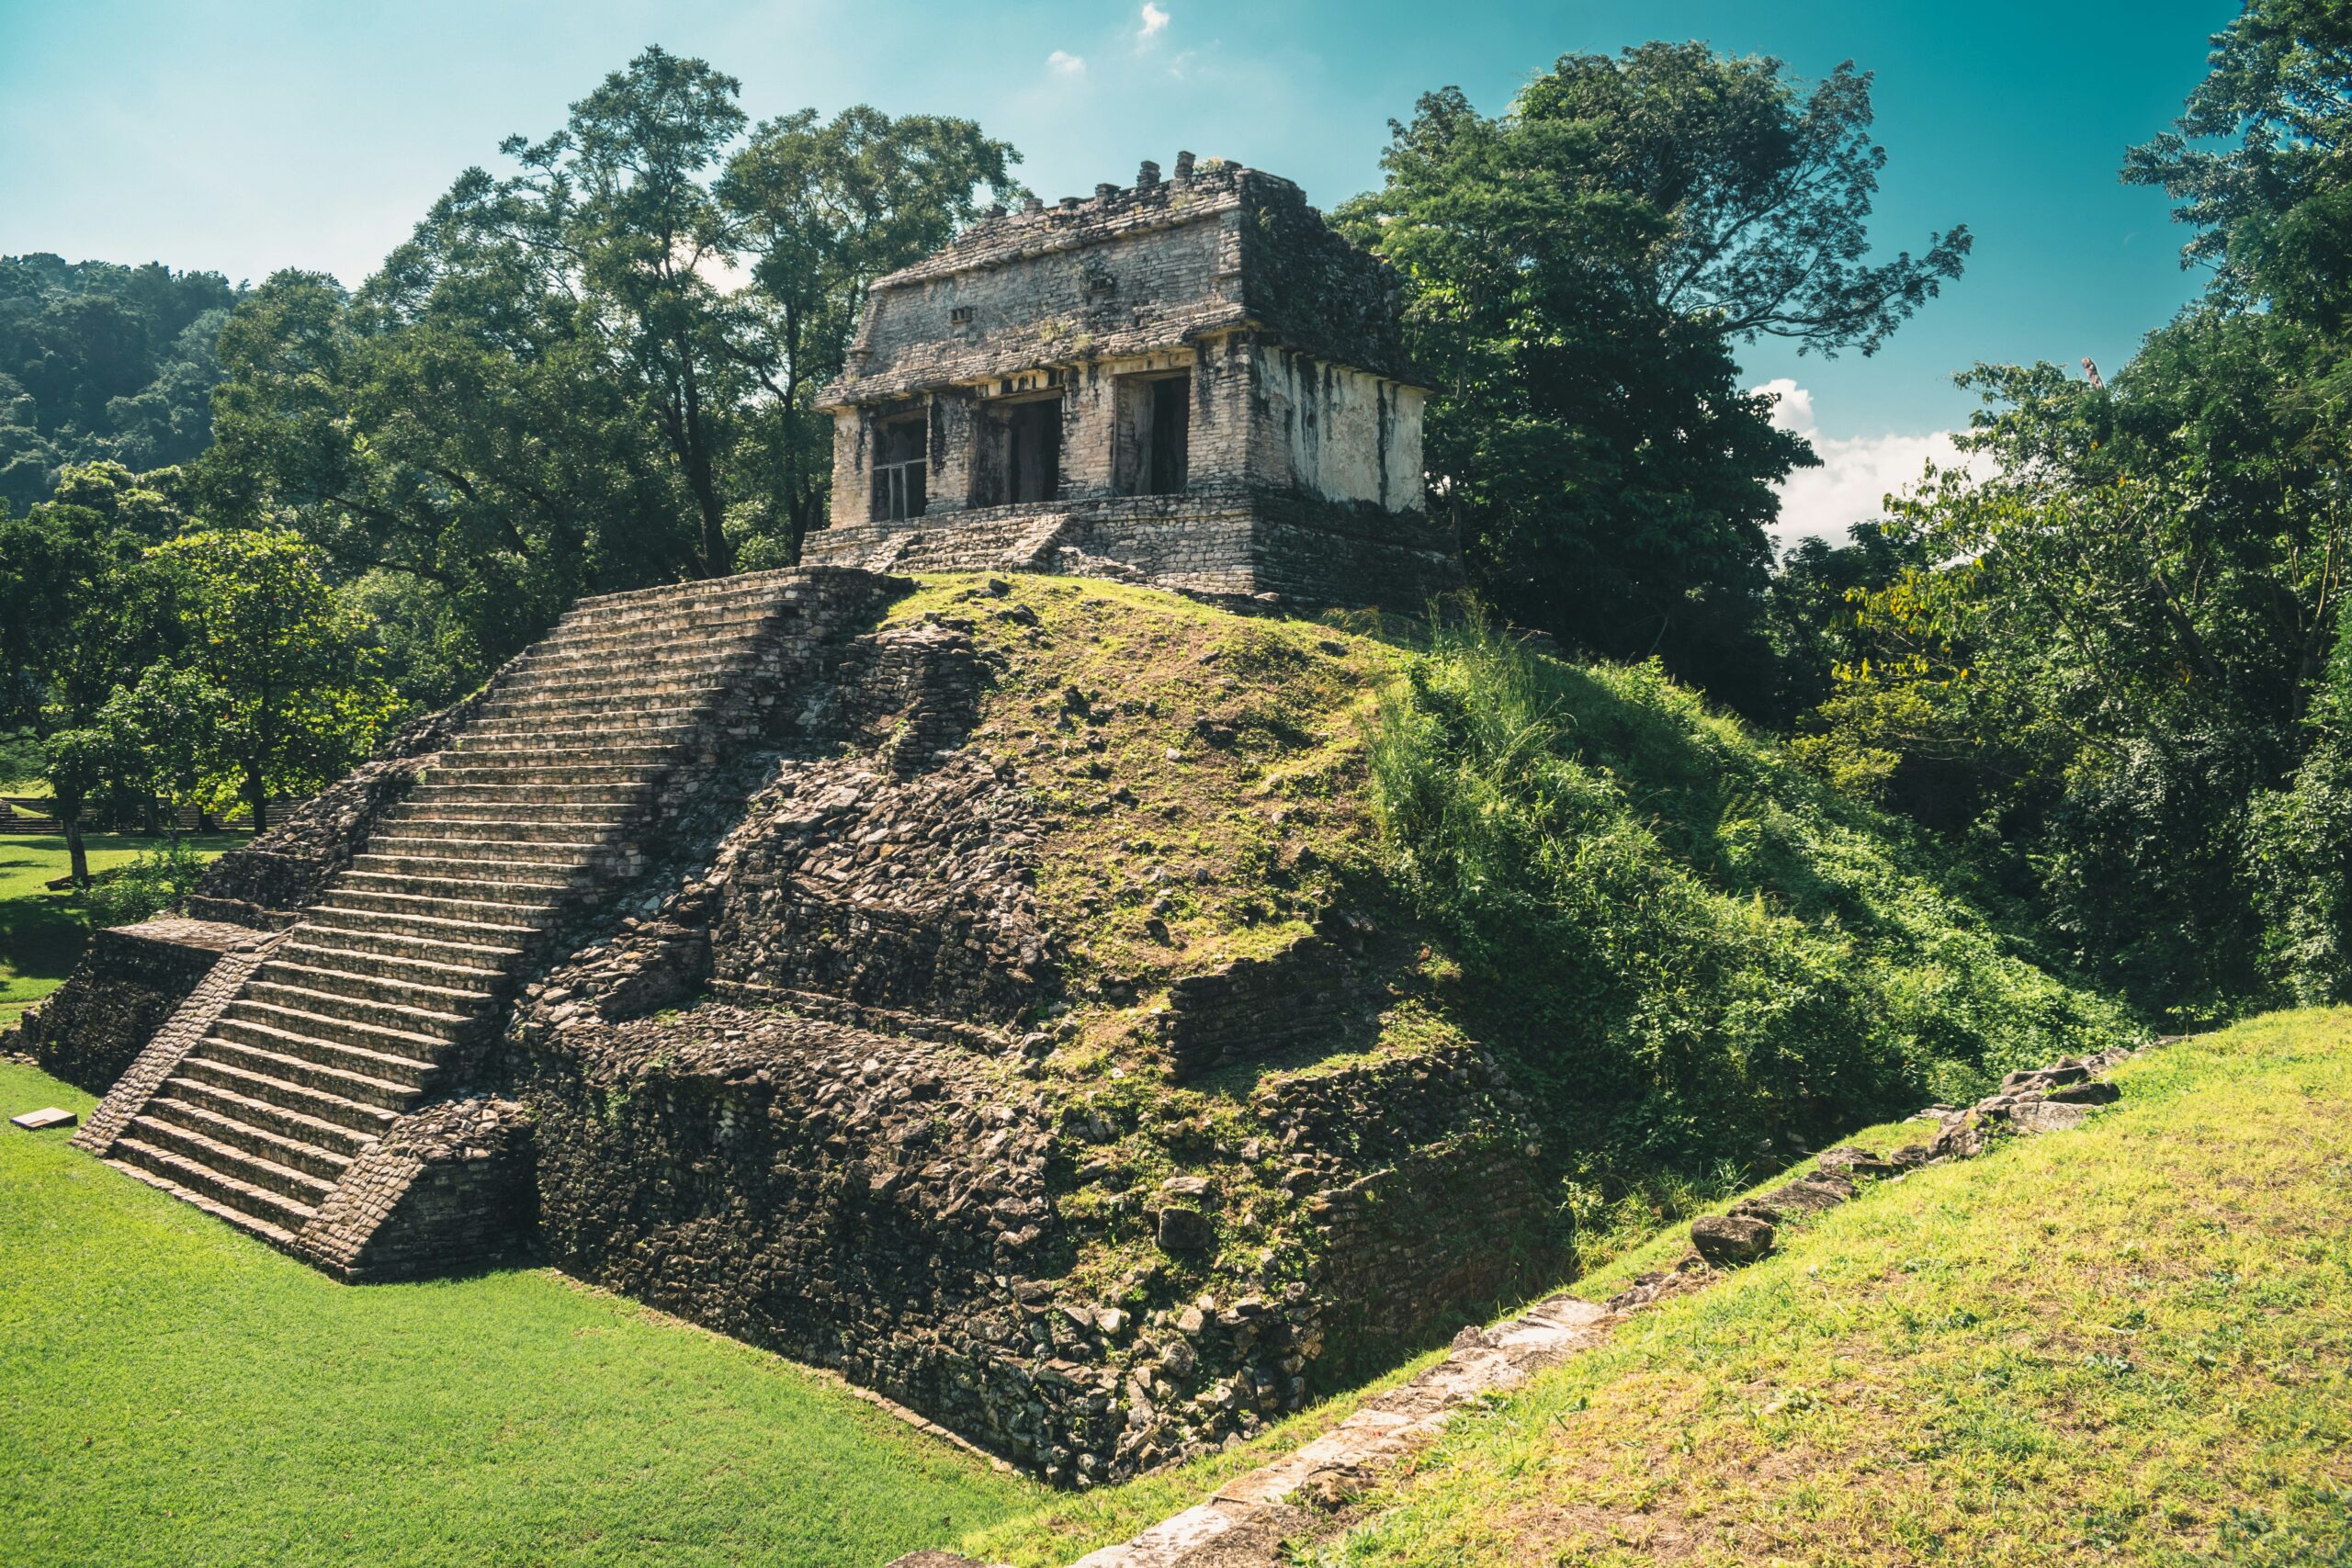 The Palenque site is an ancient location which takes an extensive commute. 
pictured: Palenque ruins with green grass growth up the pyramids hill 